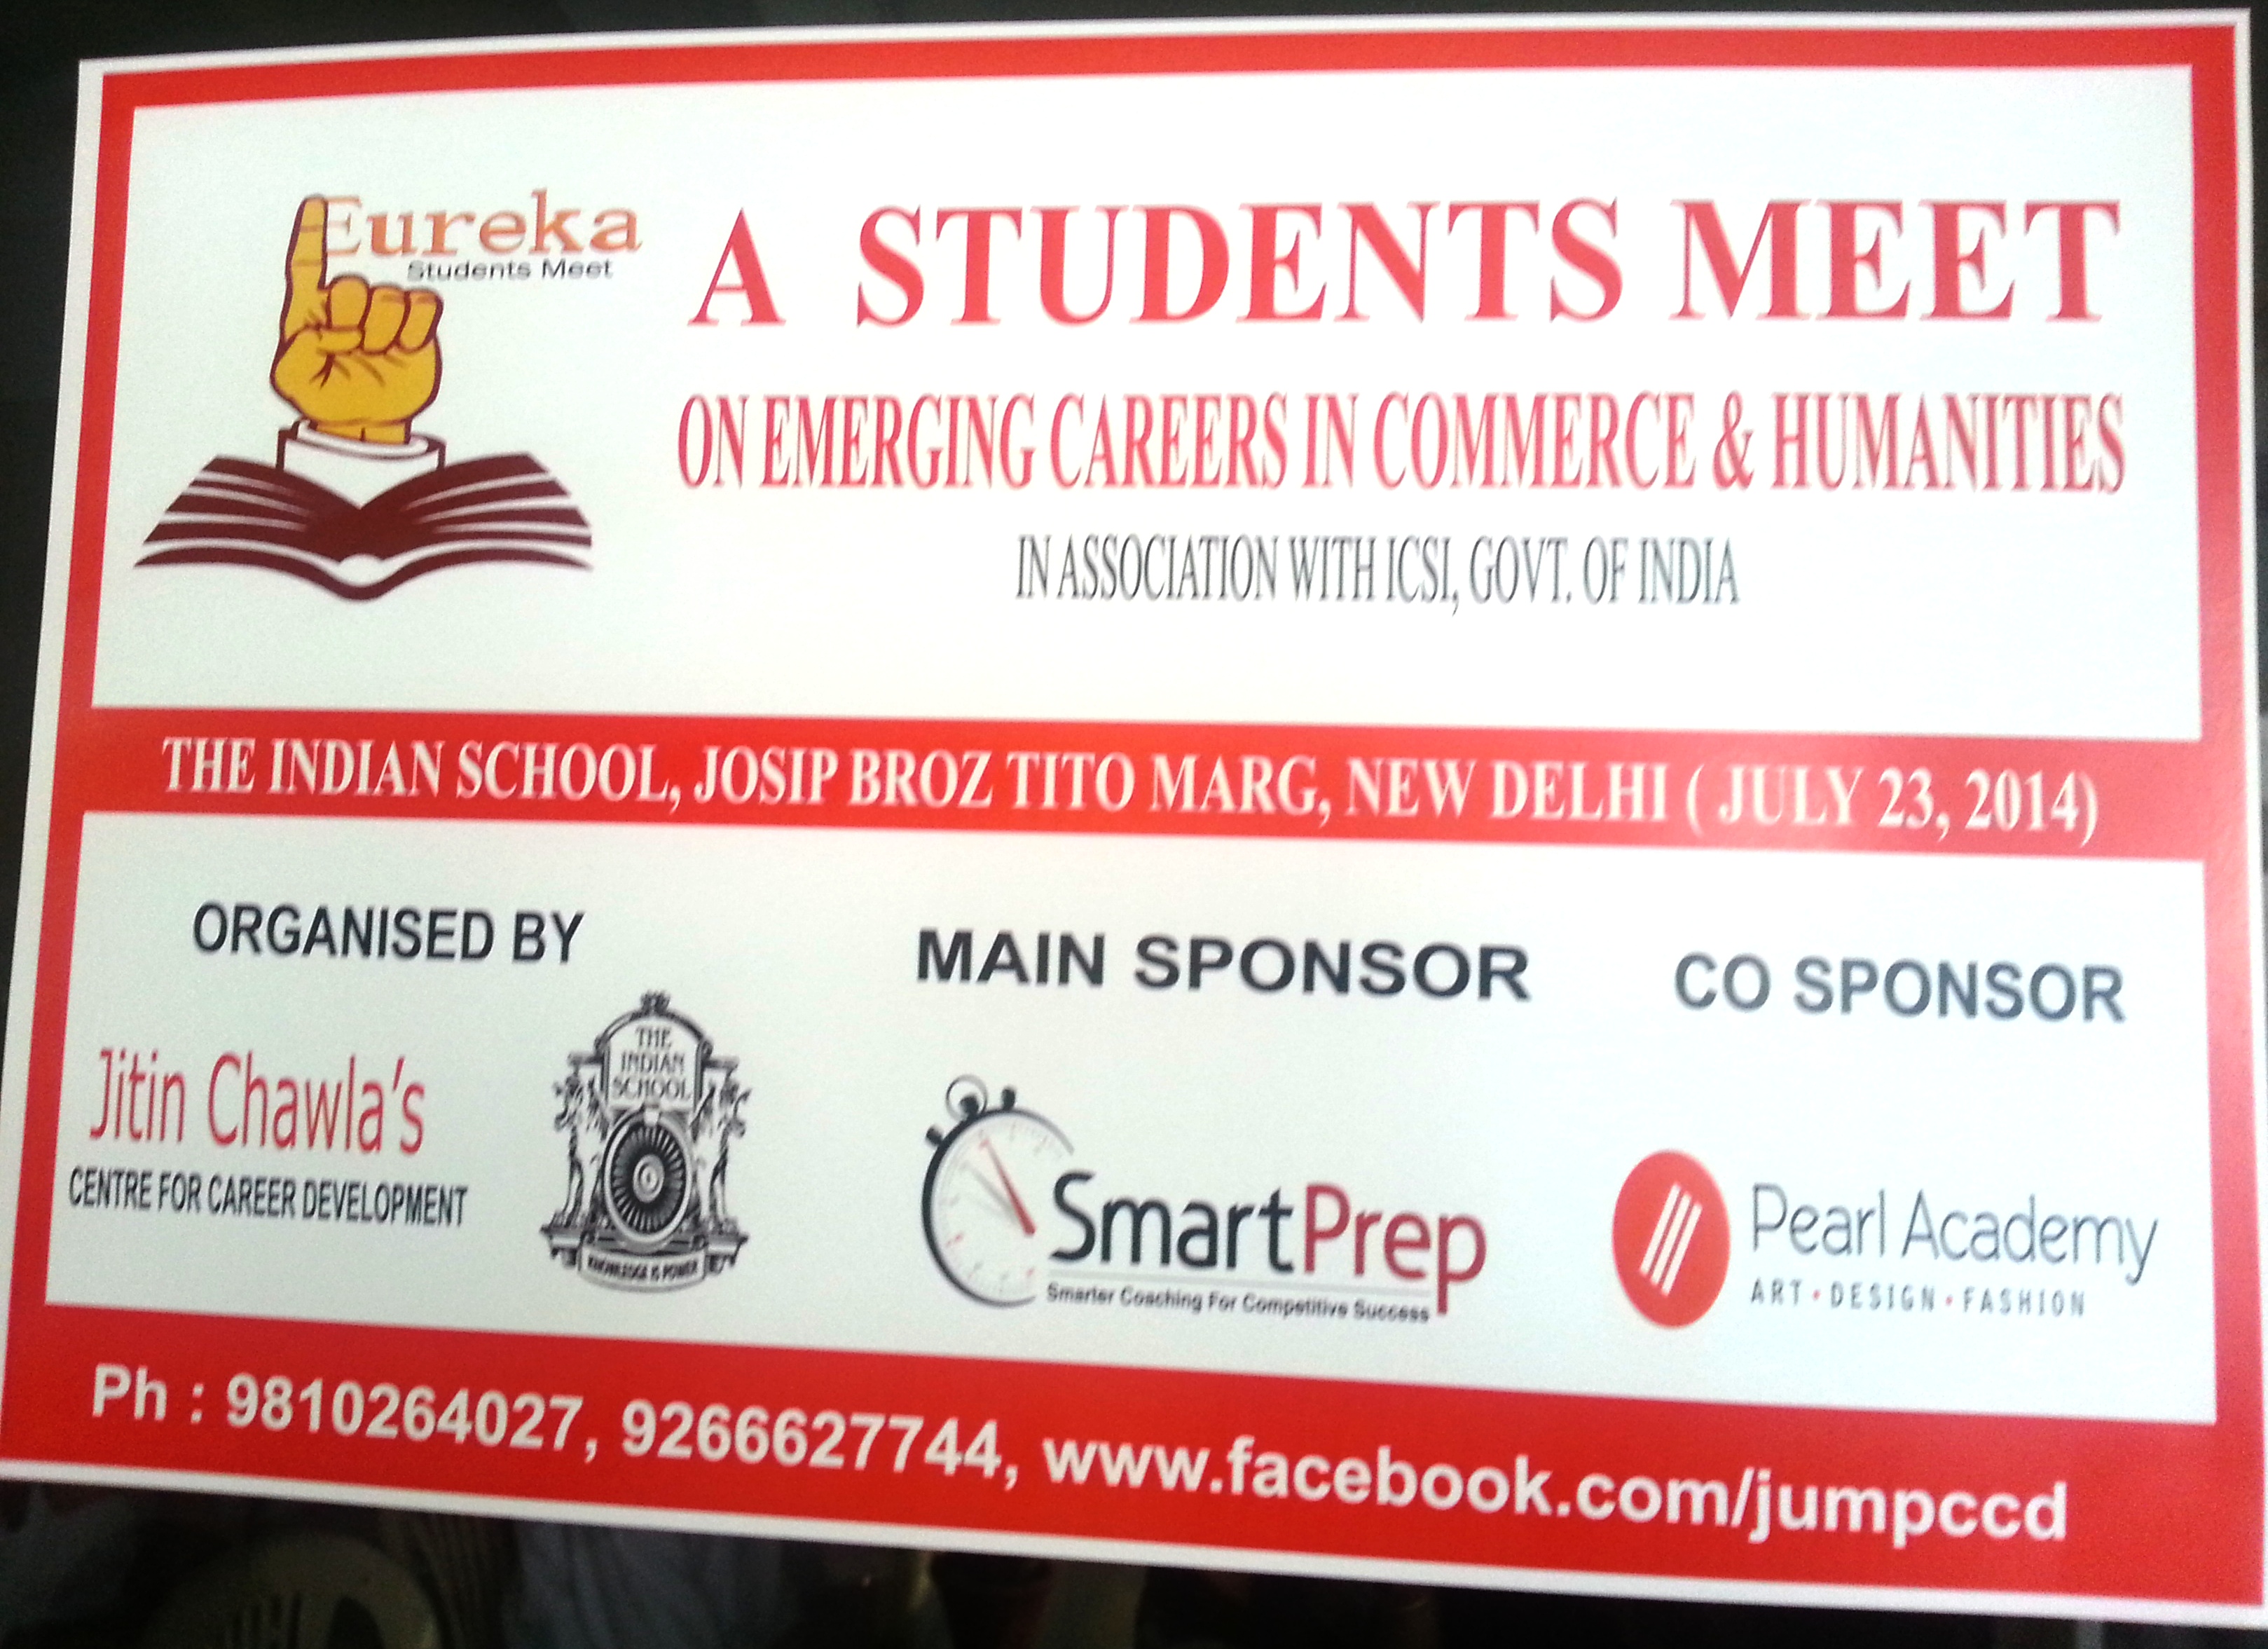 Eureka- A students meet on emerging careers in commerce and humanities in association with ICSI, Govt. of India